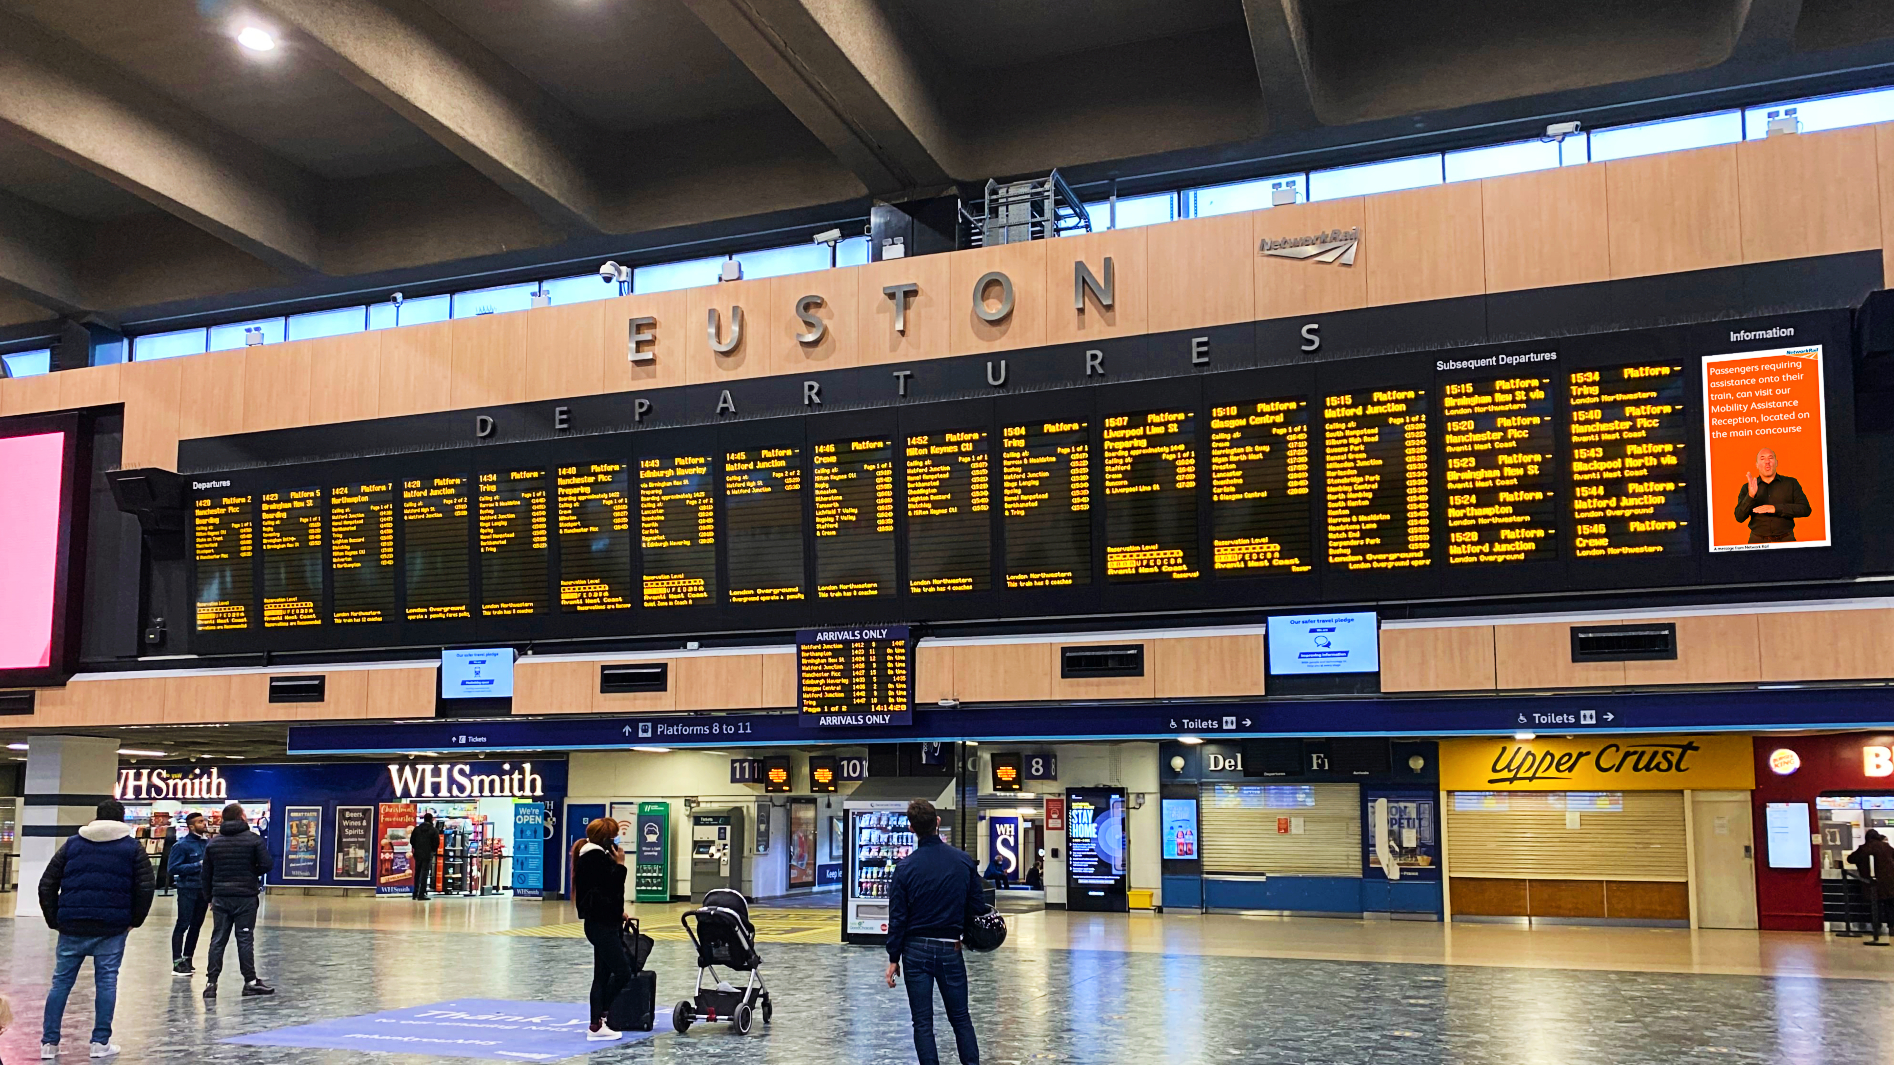 London Euston launches UK’s first British Sign Language station announcements